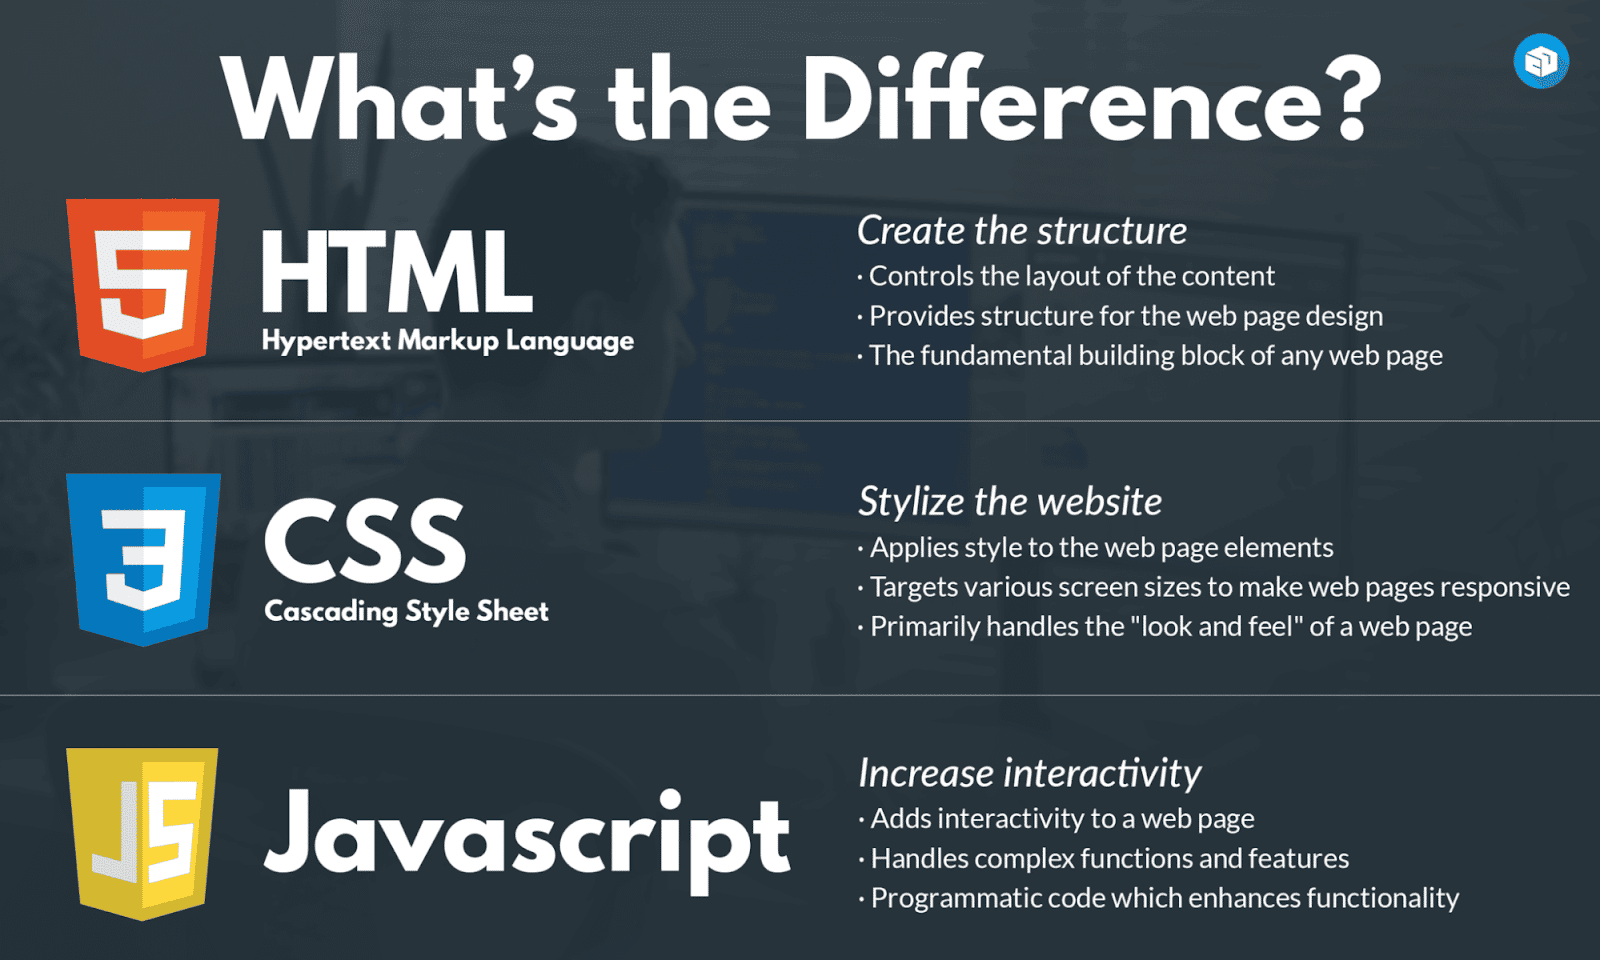 HTML, CSS, and JavaScript are major components of most websites